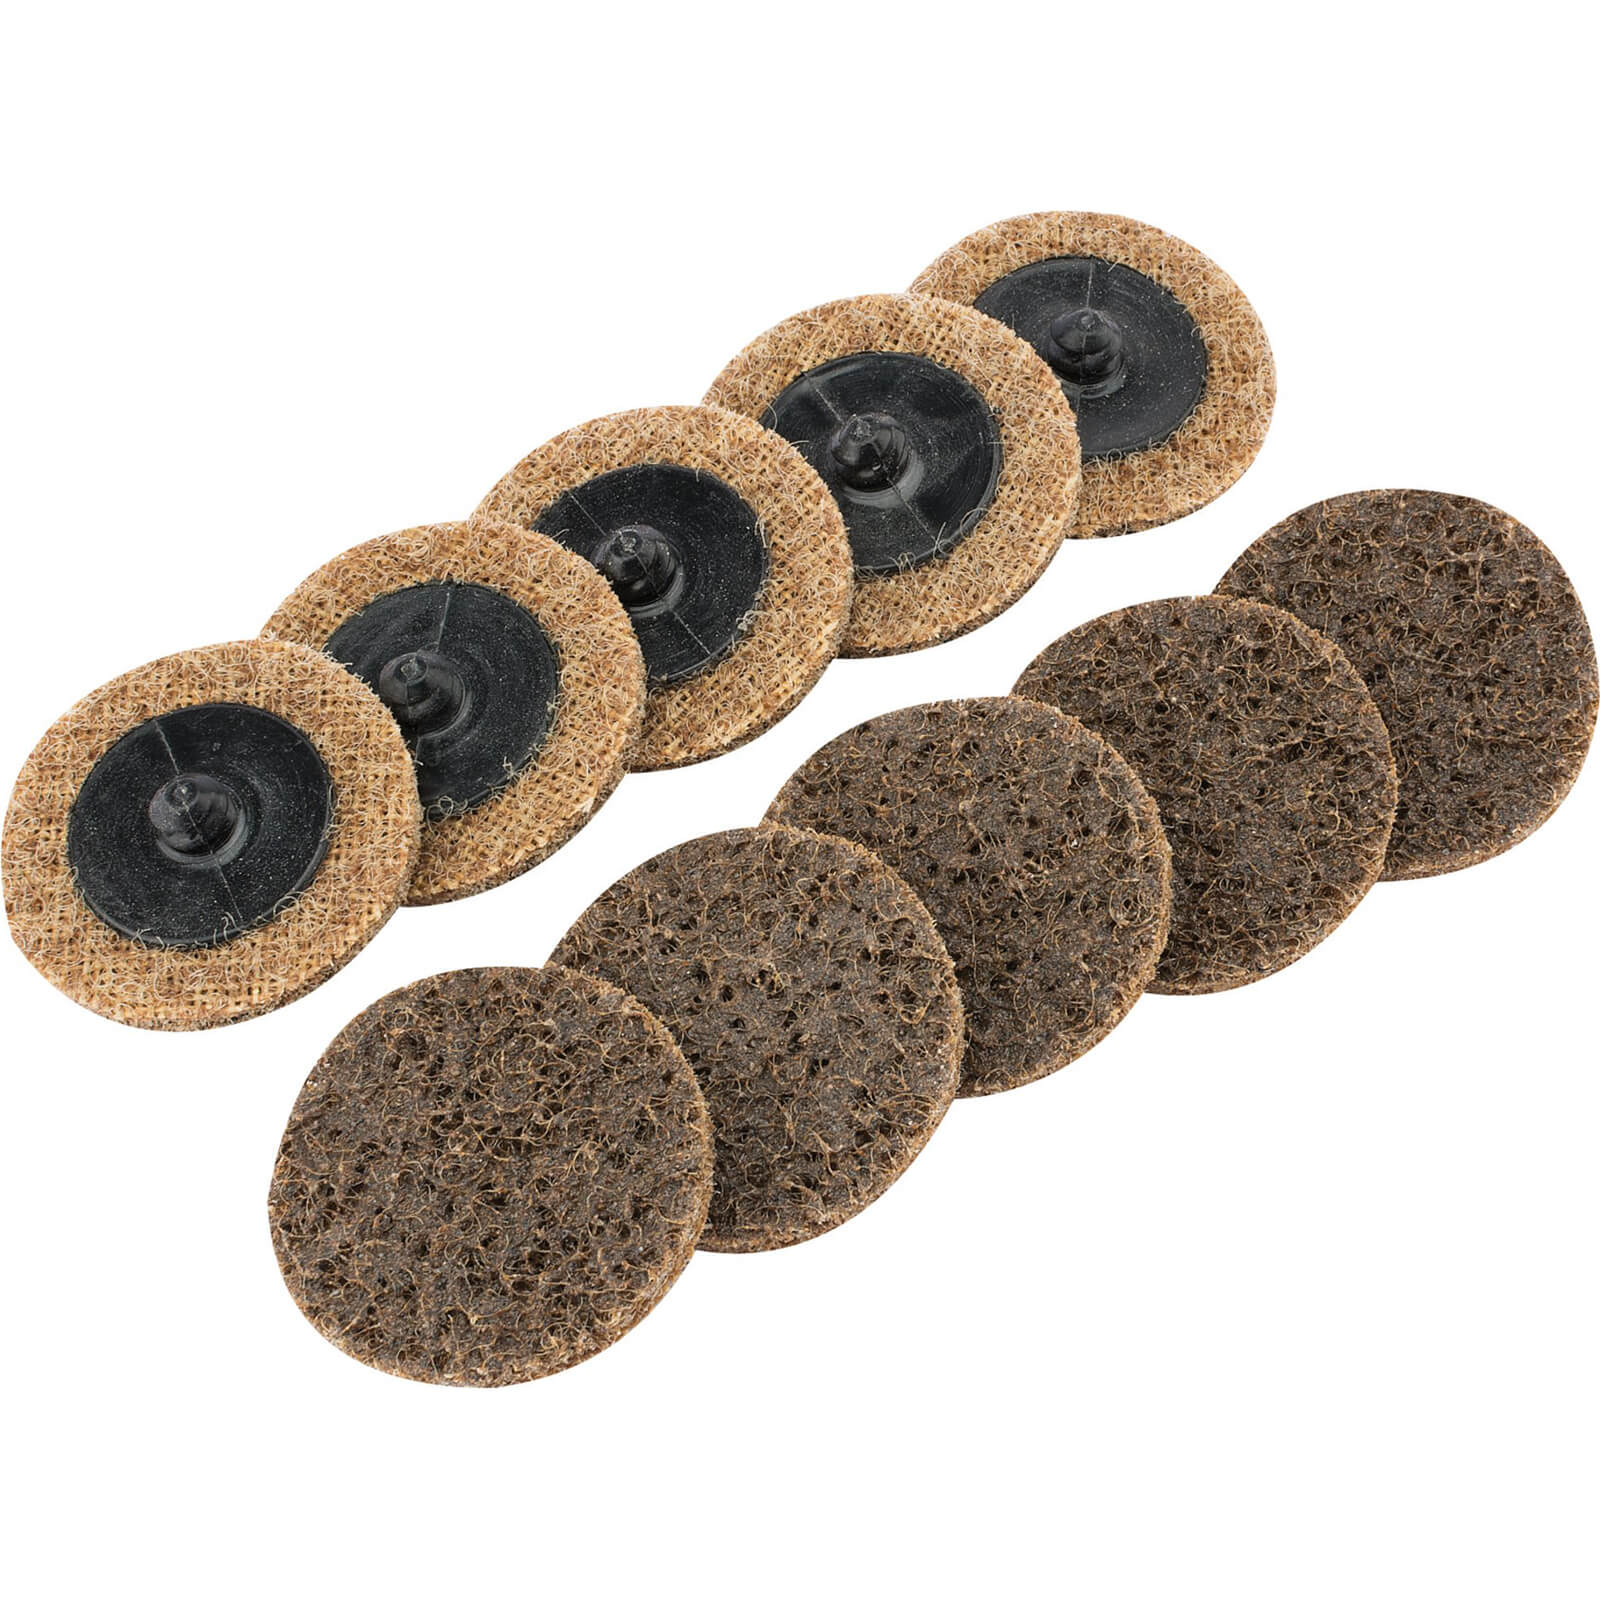 Image of Draper Polycarbide Abrasive Pad Disc 50mm 50mm Coarse Pack of 10